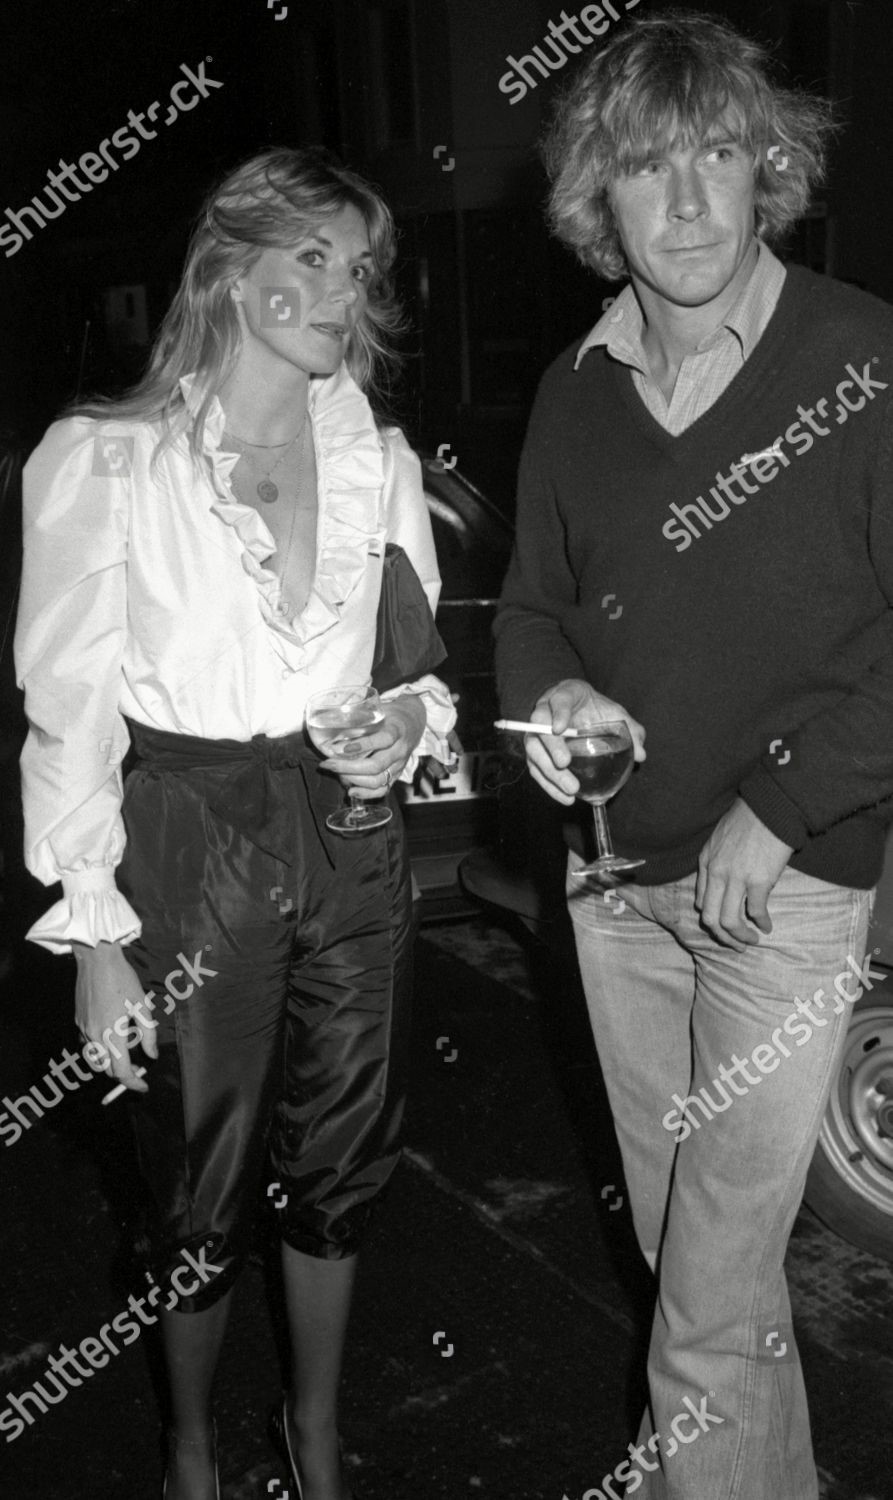 James Hunt at Oyster Party at Drones, Pont Street, 02 October 1981.